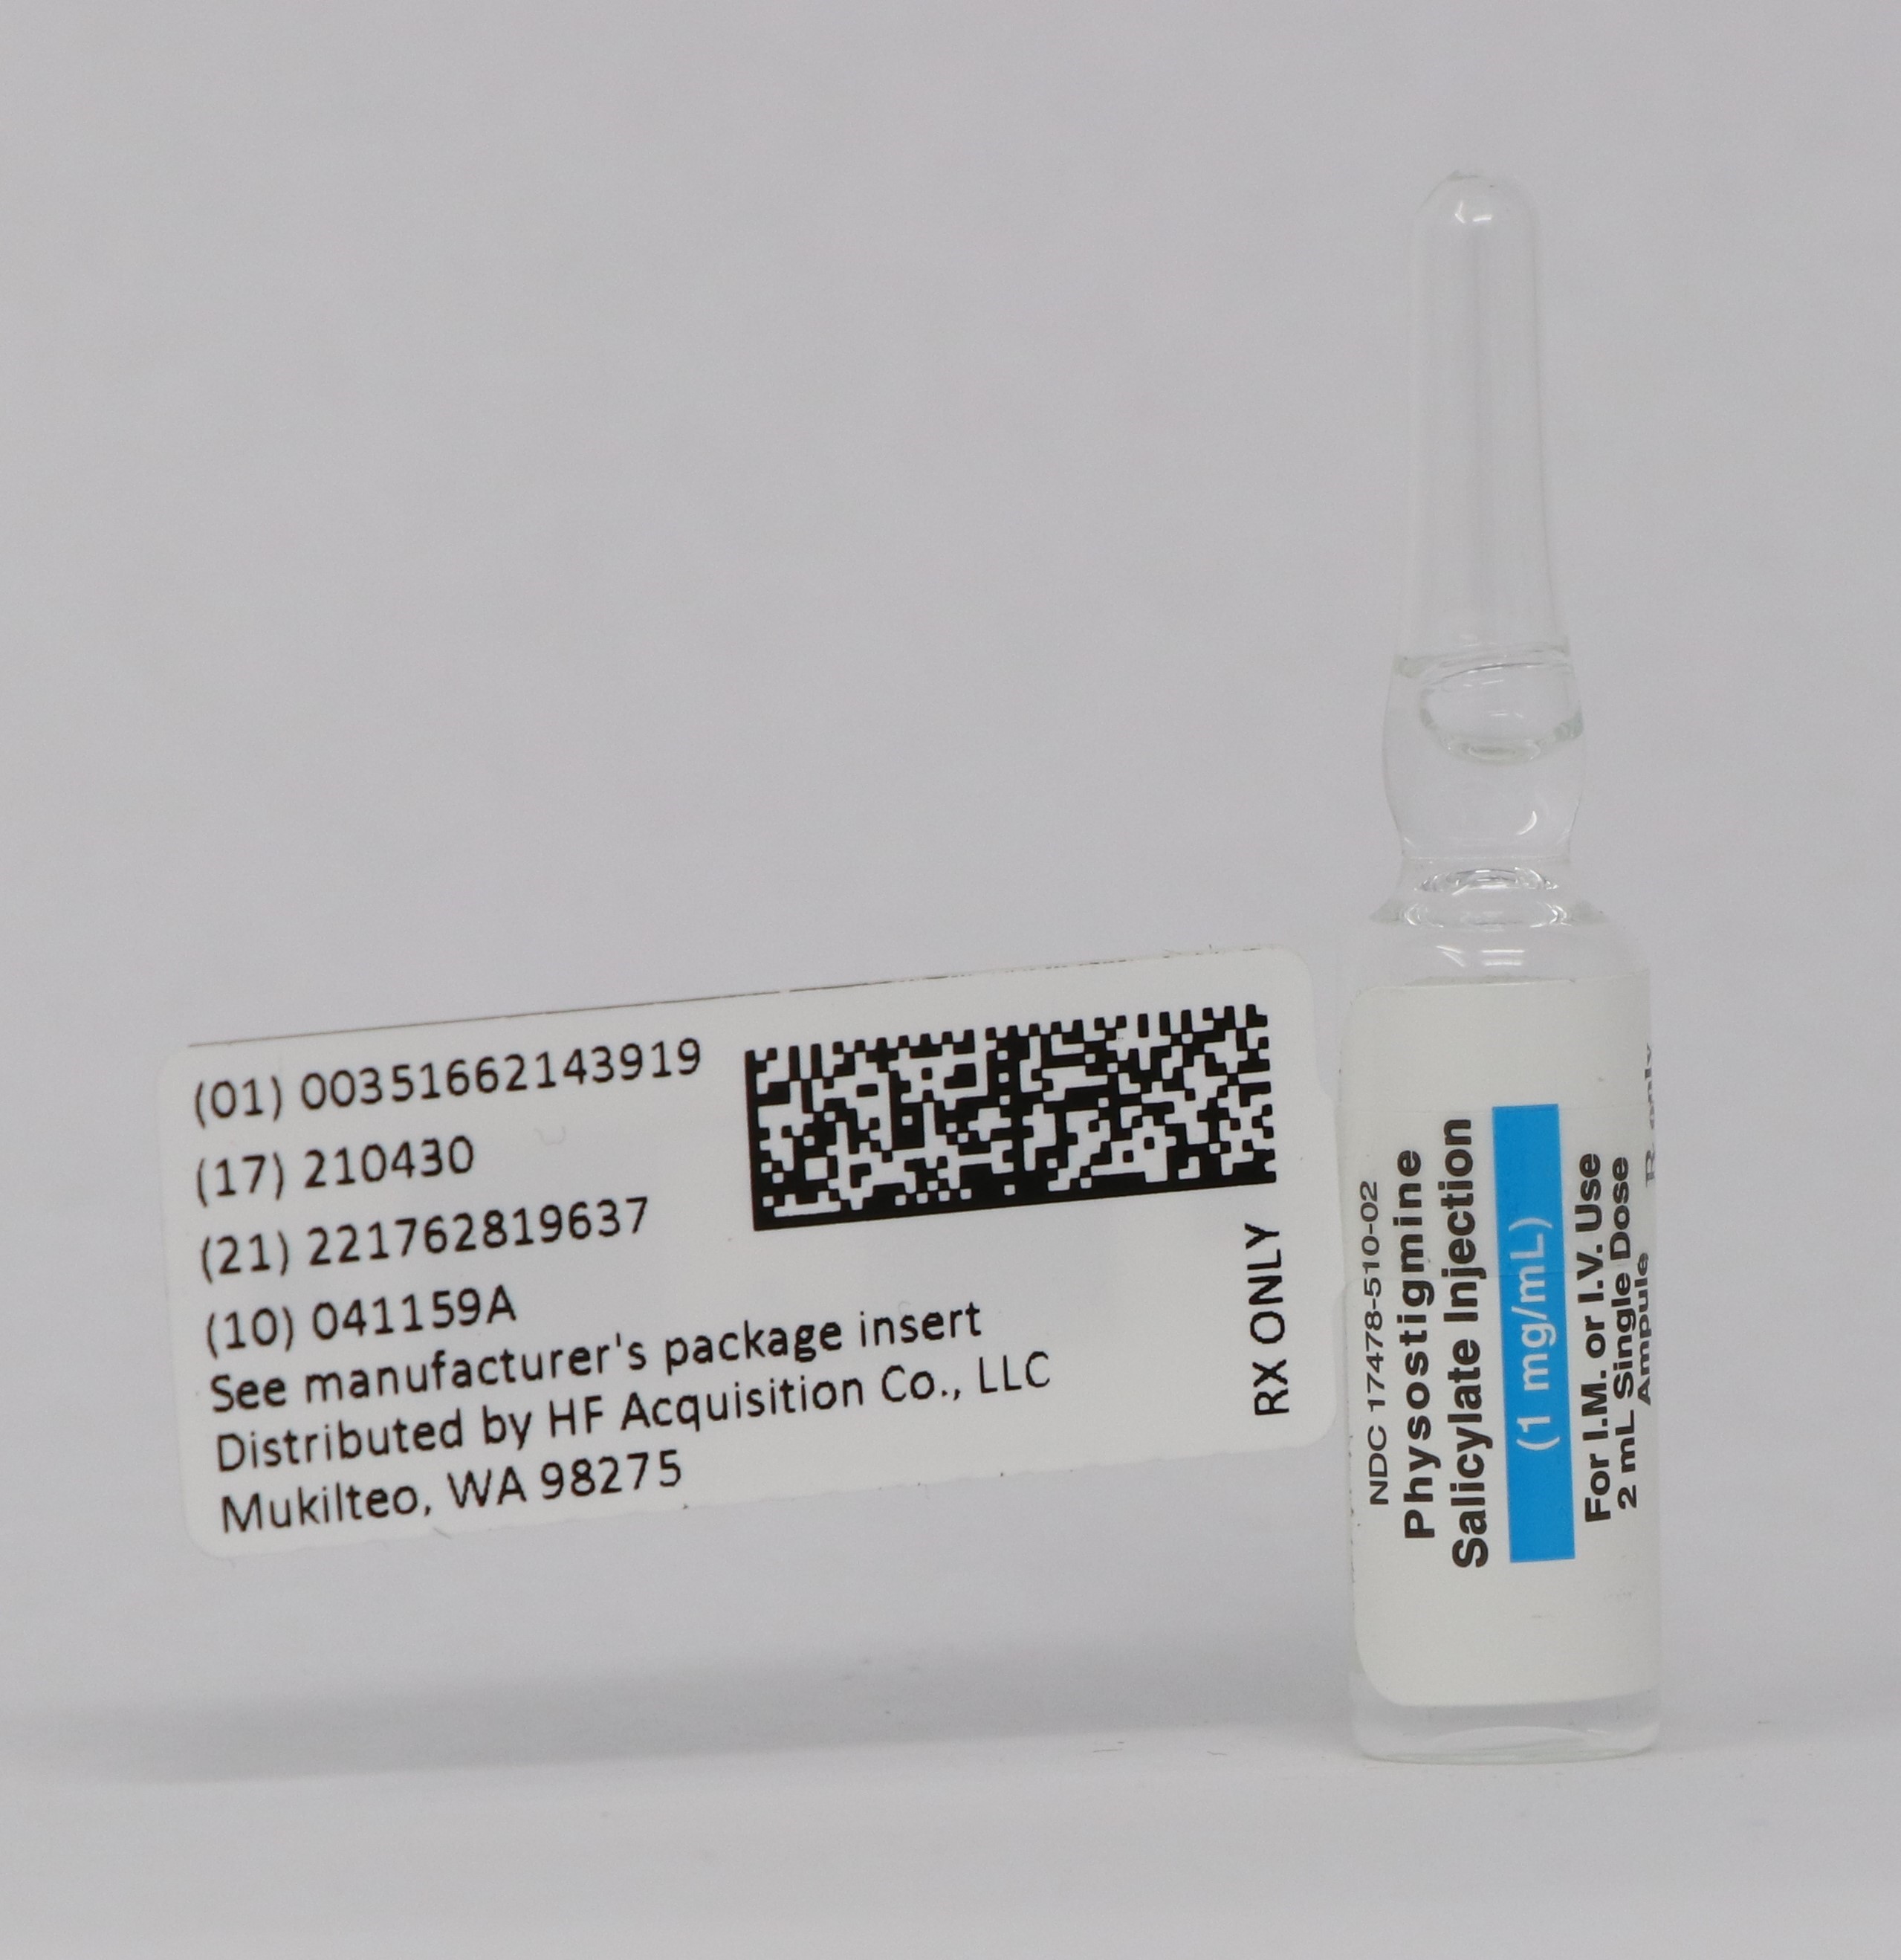 SERIALIZED AMPULE LABELING